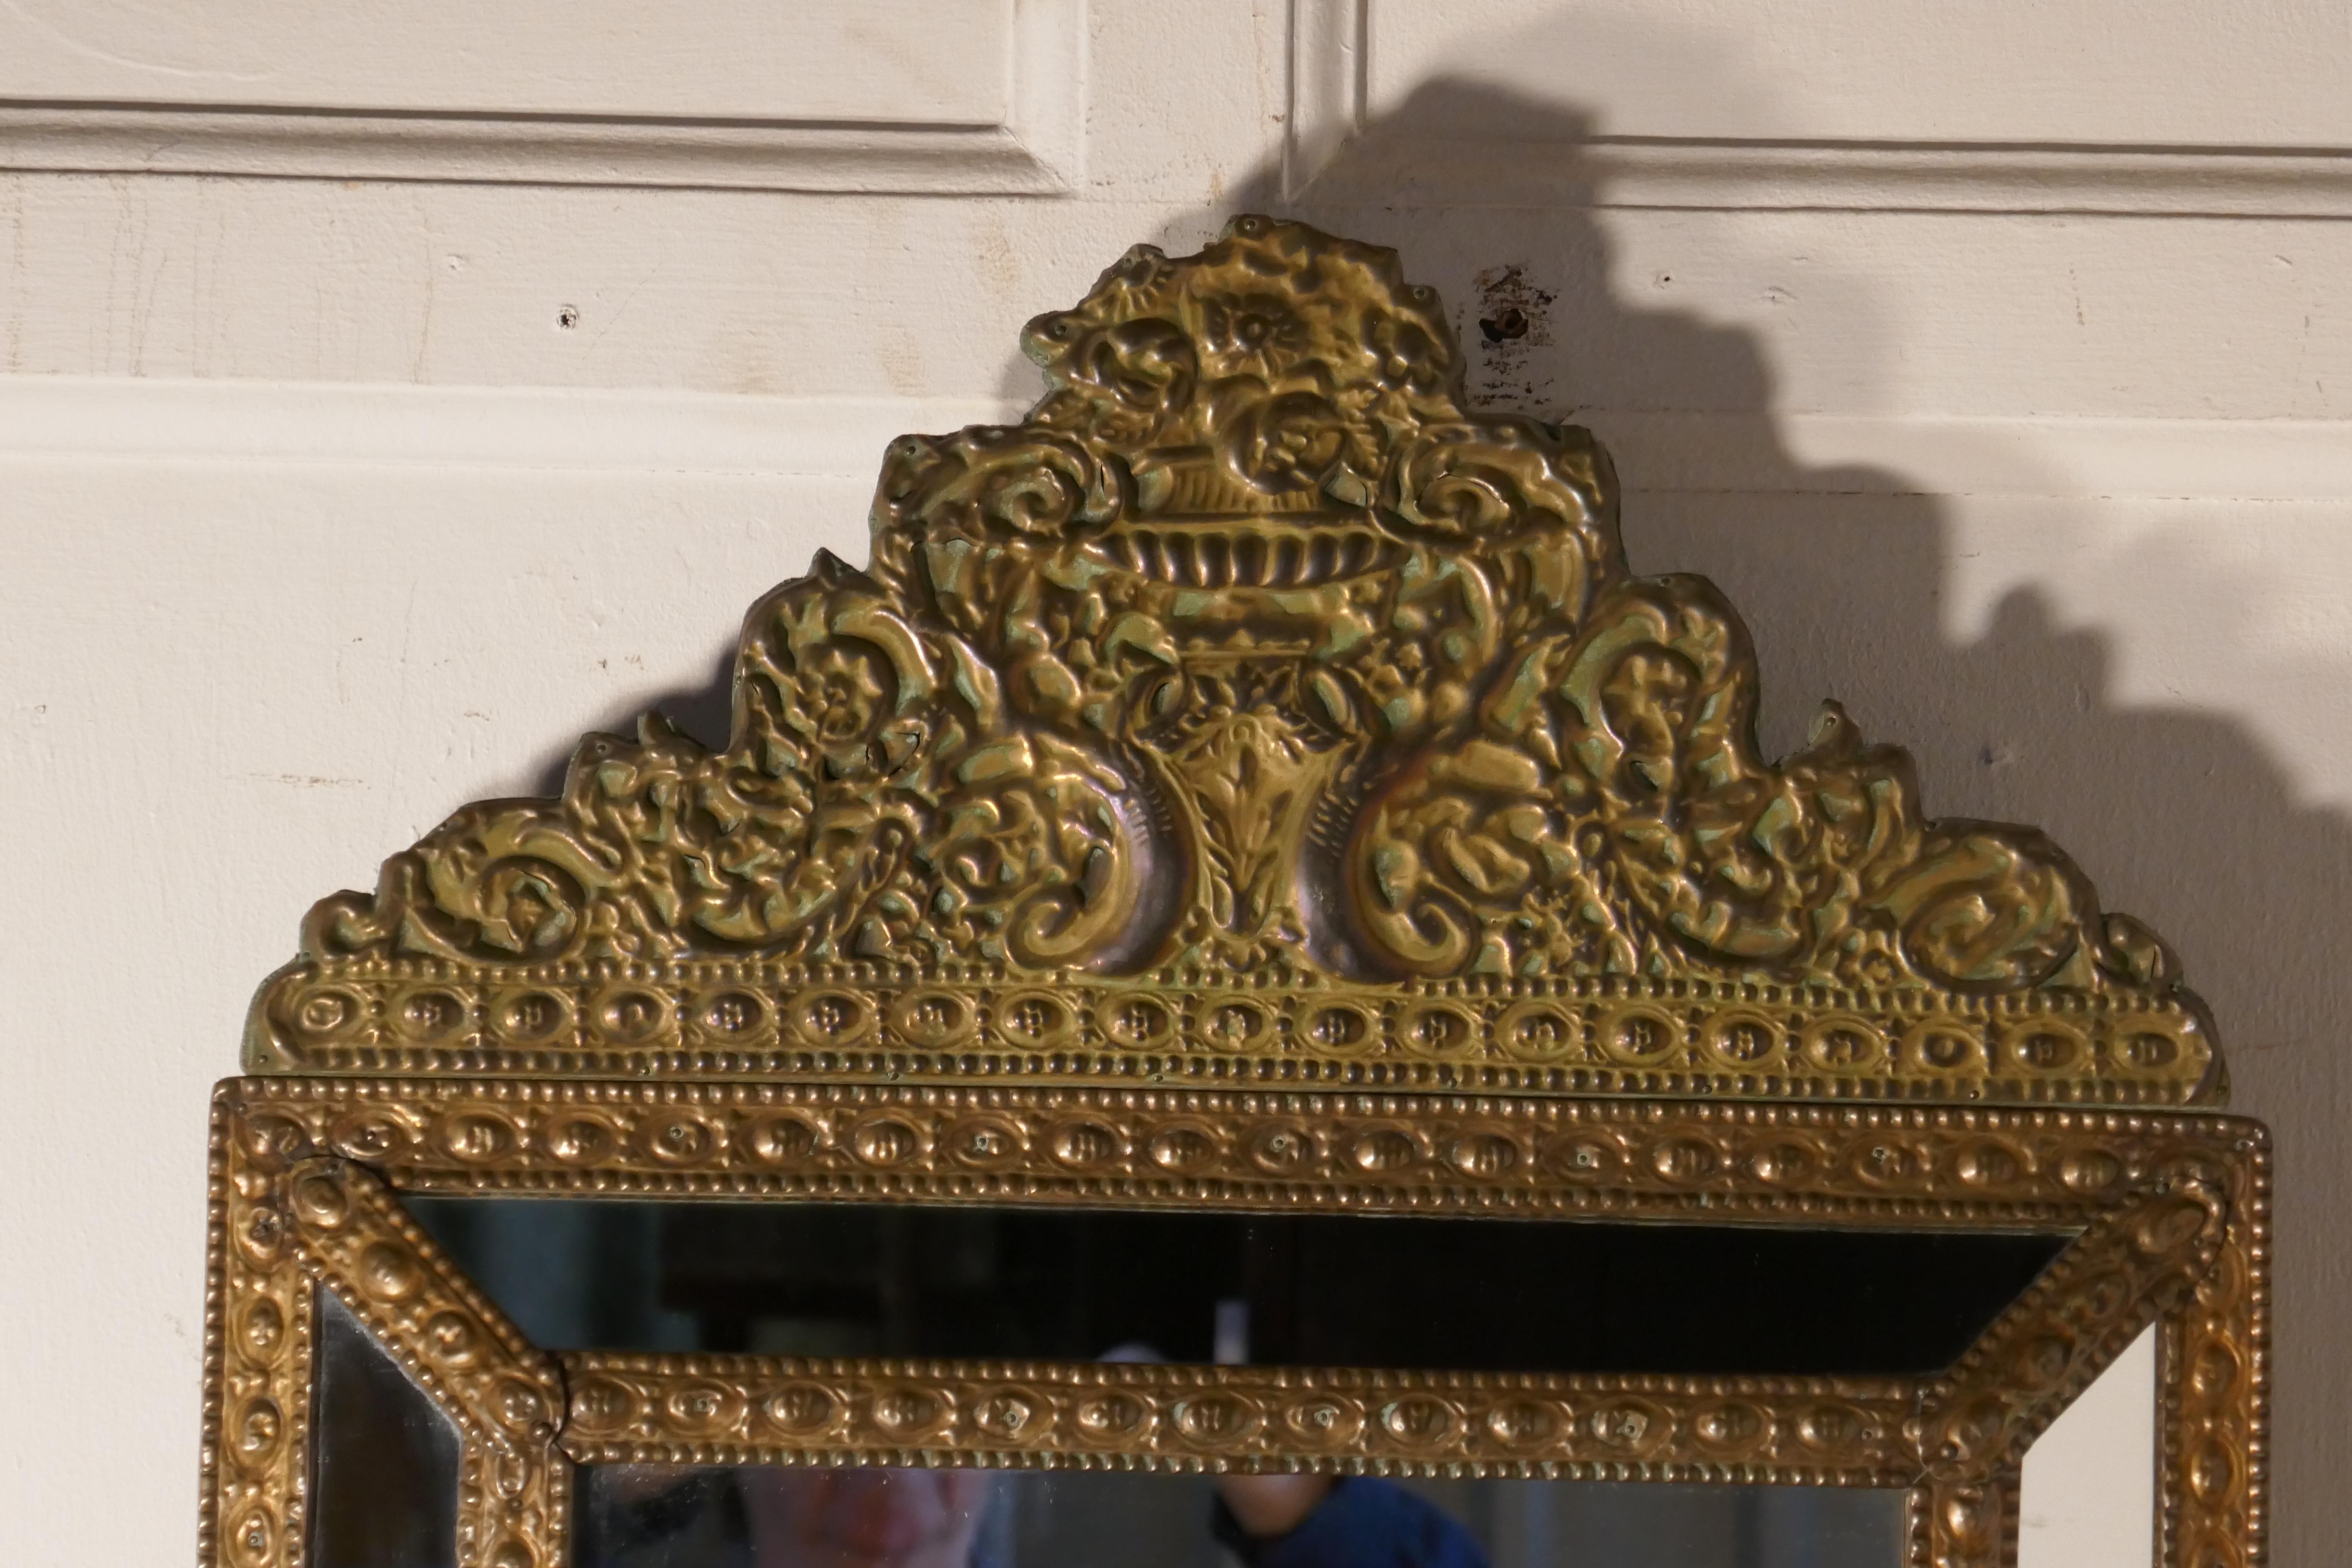 A large Napoleon III French bass cushion mirror

This is a small version of this type of mirror, the beaten brass frame is profusely decorated with flowers
The mirrors are all original, and the brass has taken on a charming verdigris